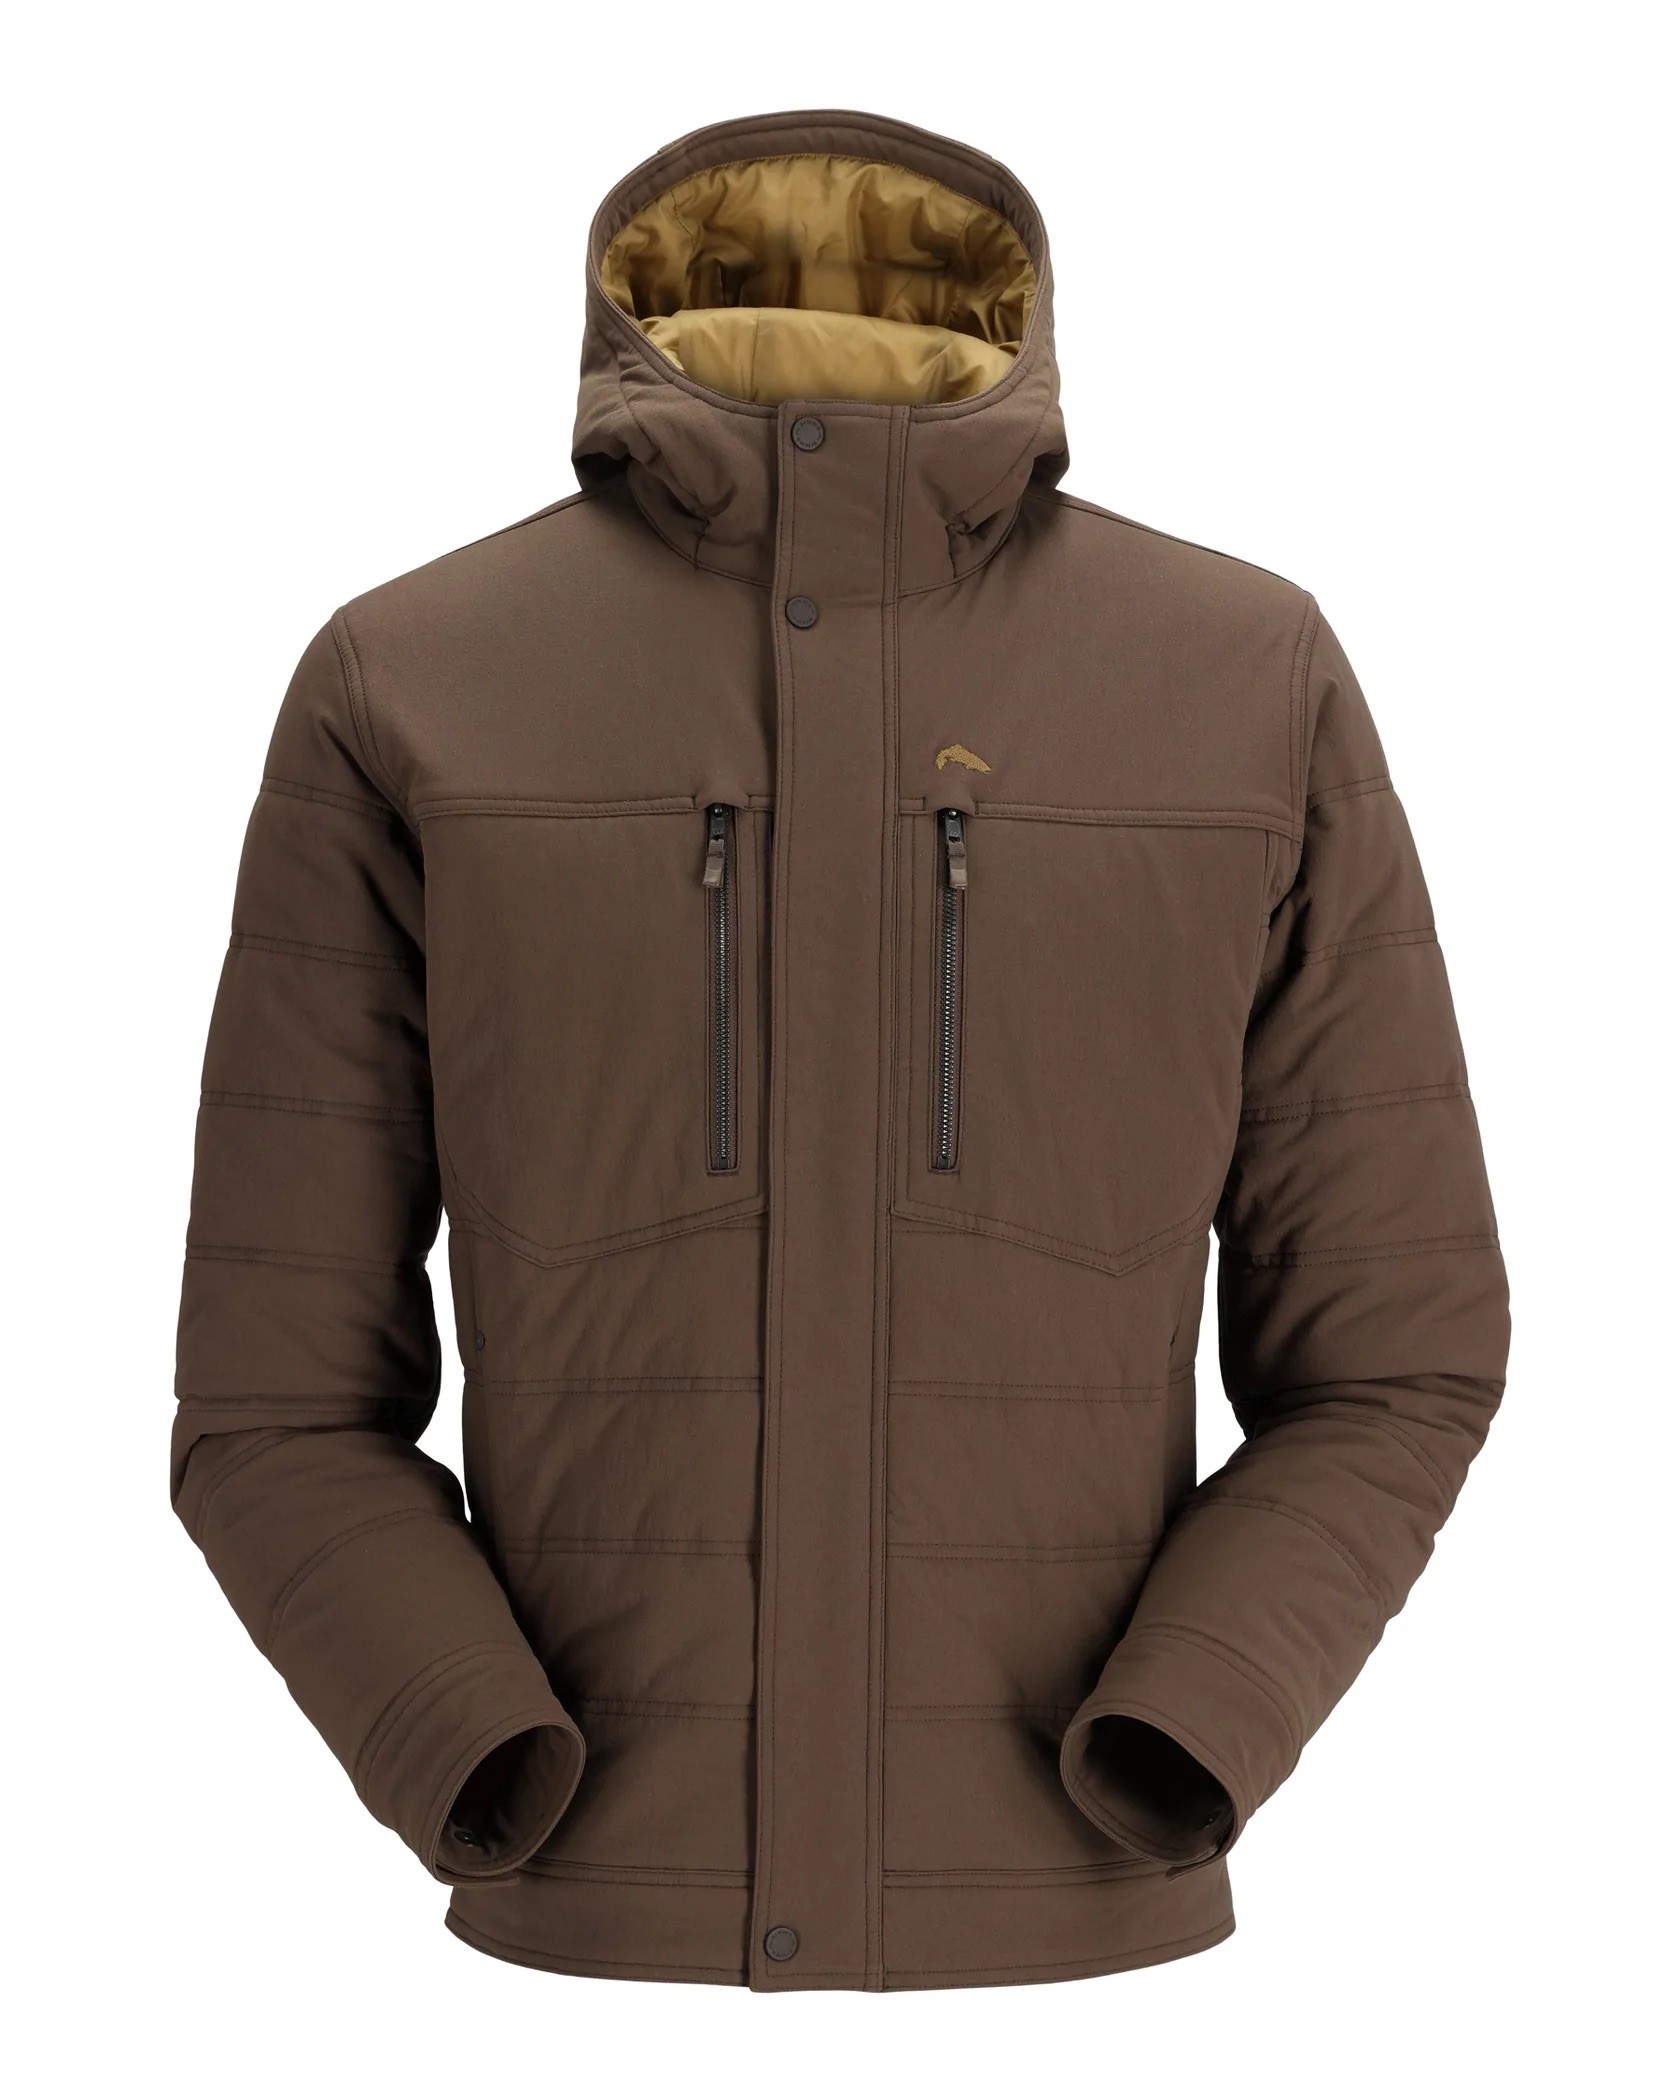 Simms M's Cardwell Hooded Jacket - Hickory - XXL